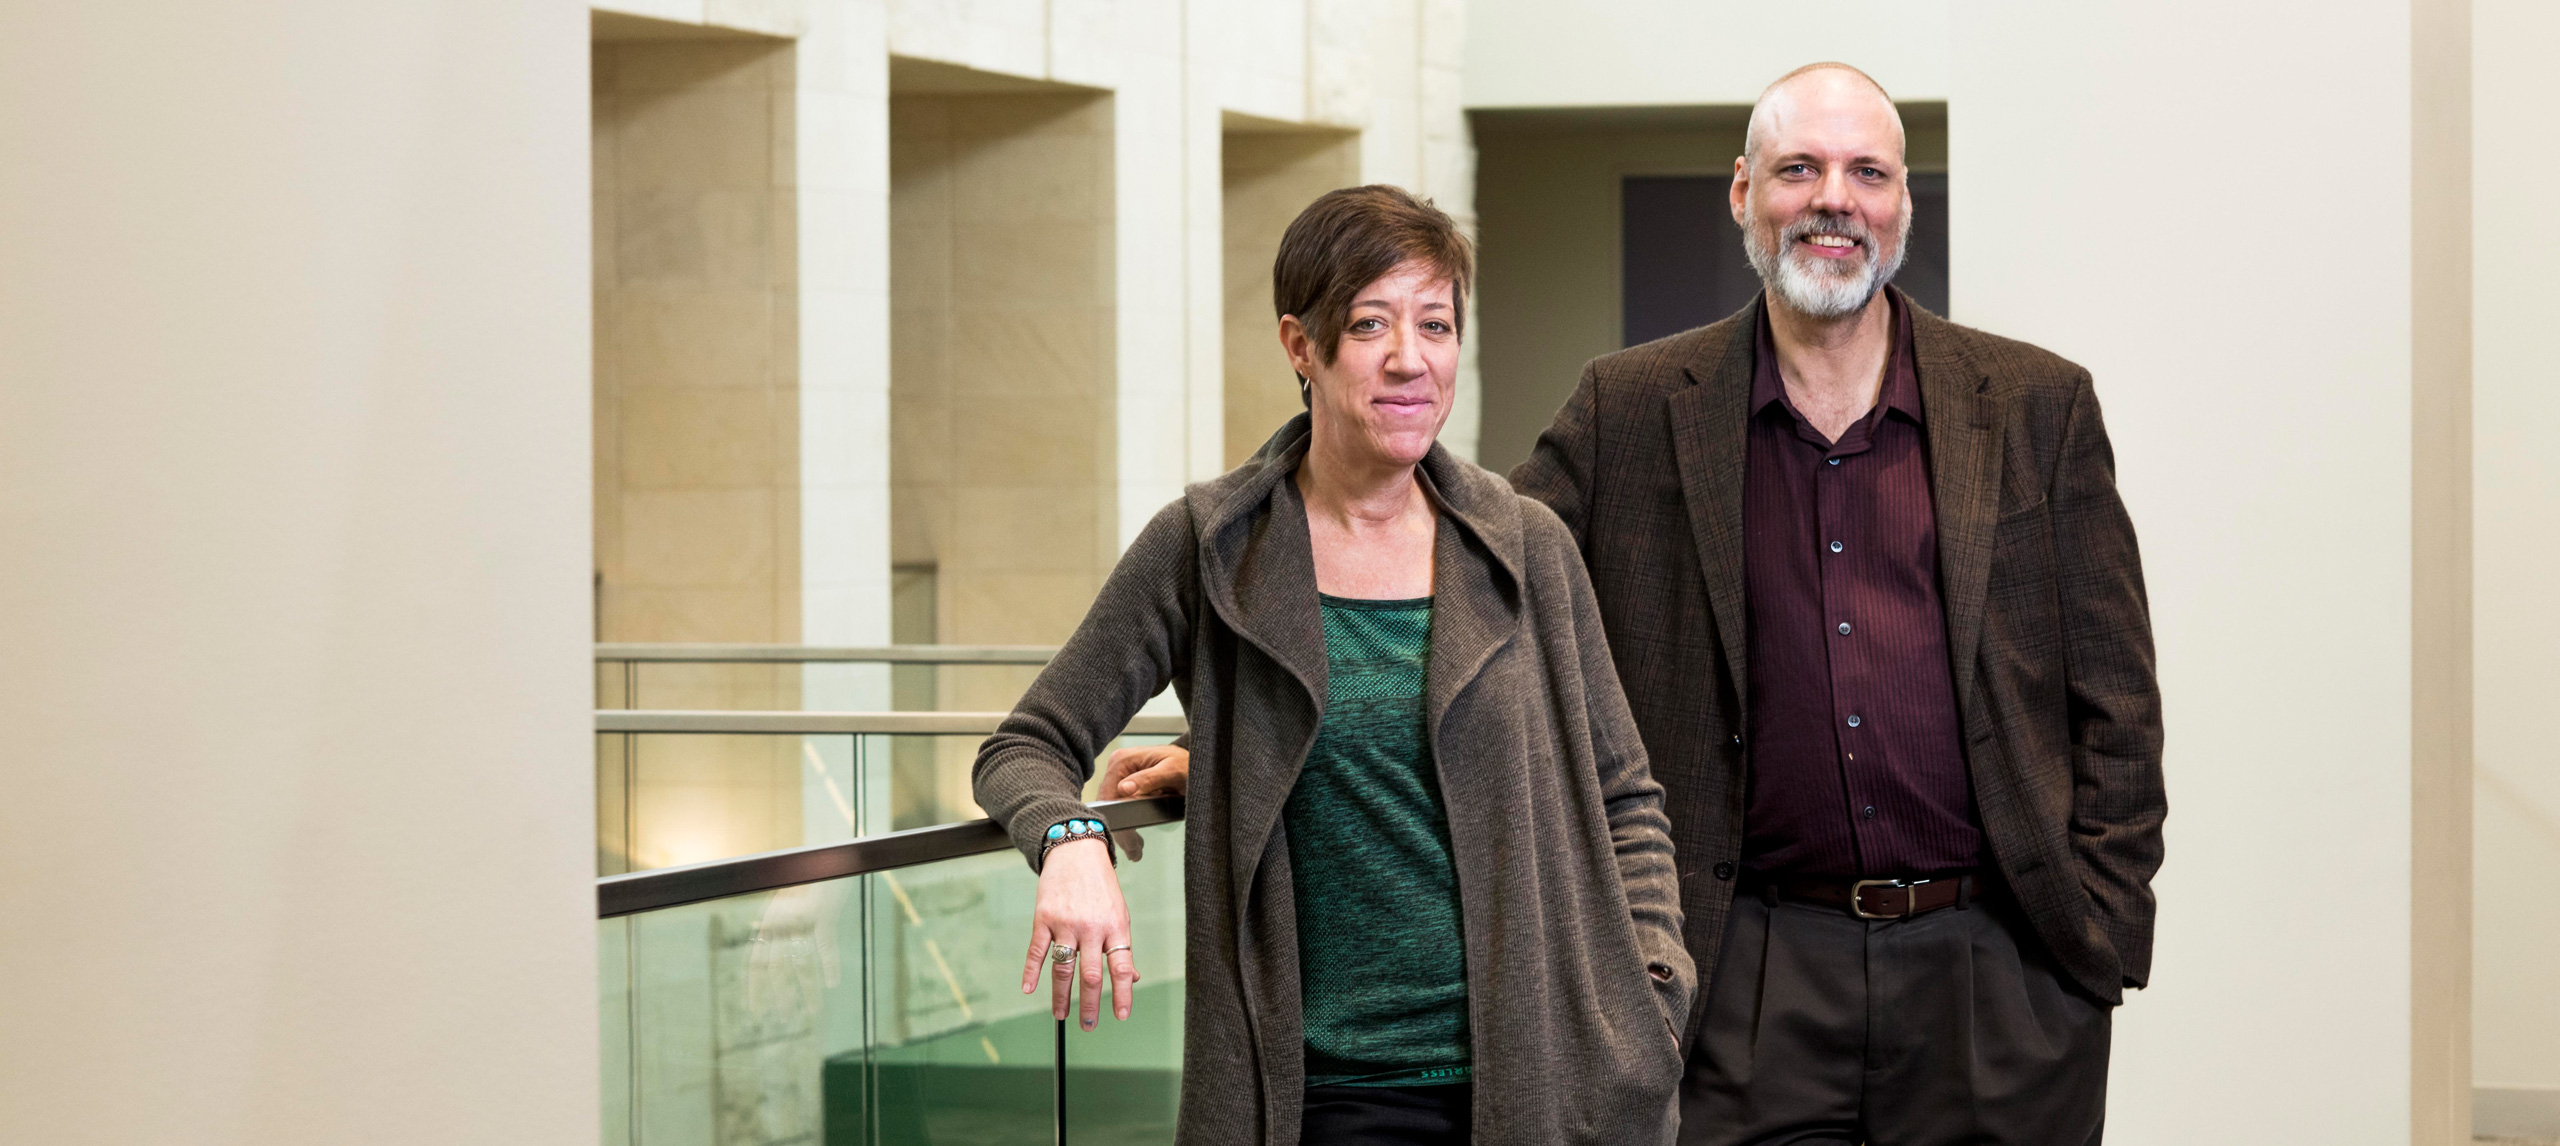 Melinda Levin, professor of media arts, and Joseph Klein, chair of composition studies and professor of composition, were named IAA Fellows. They will have a semester off from teaching to devote time to one of their creative projects. Photographed on March 11, 2016. (Ahna Hubnik)